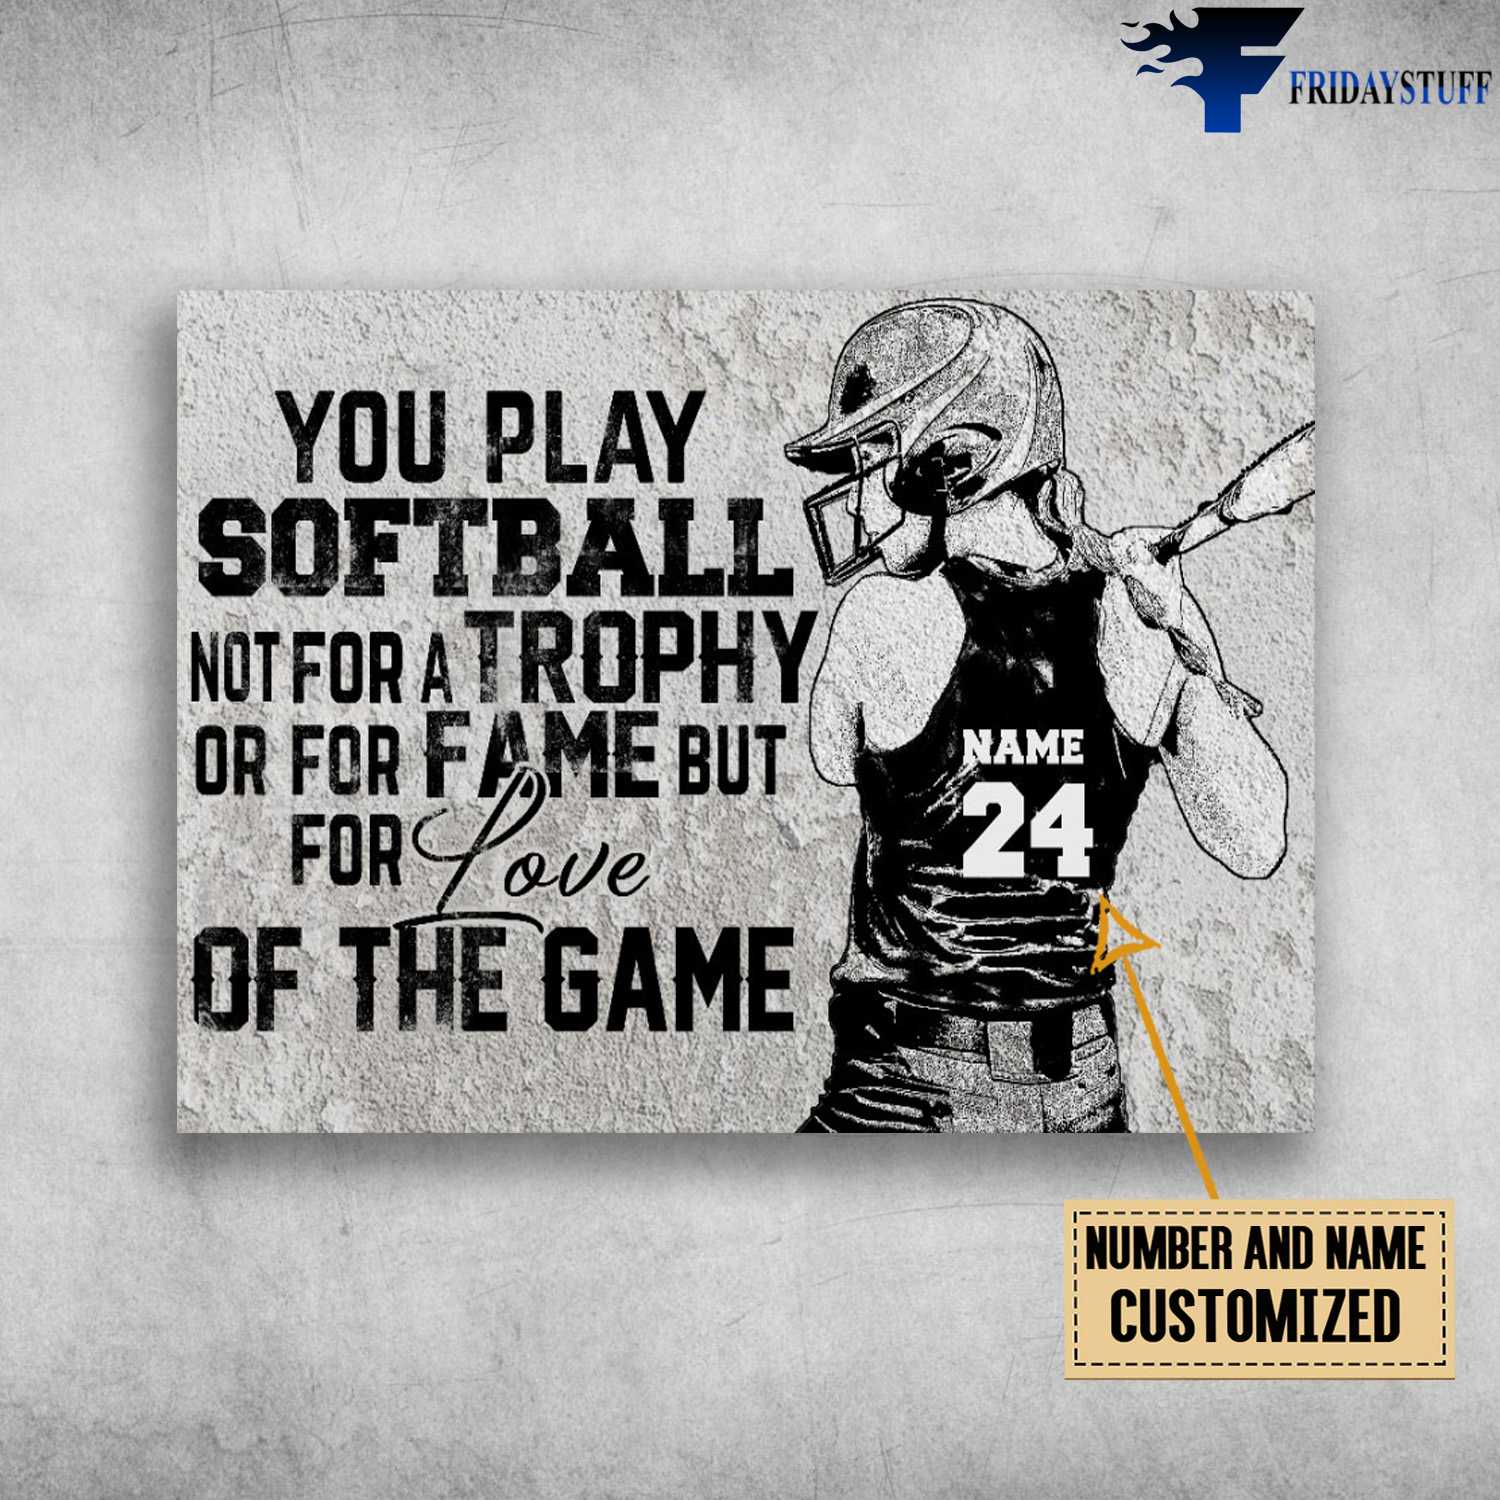 Softball Player, Softball Lover, You Play Softball Not For A Trophy, Or For Fam, But For Love, Of The Game